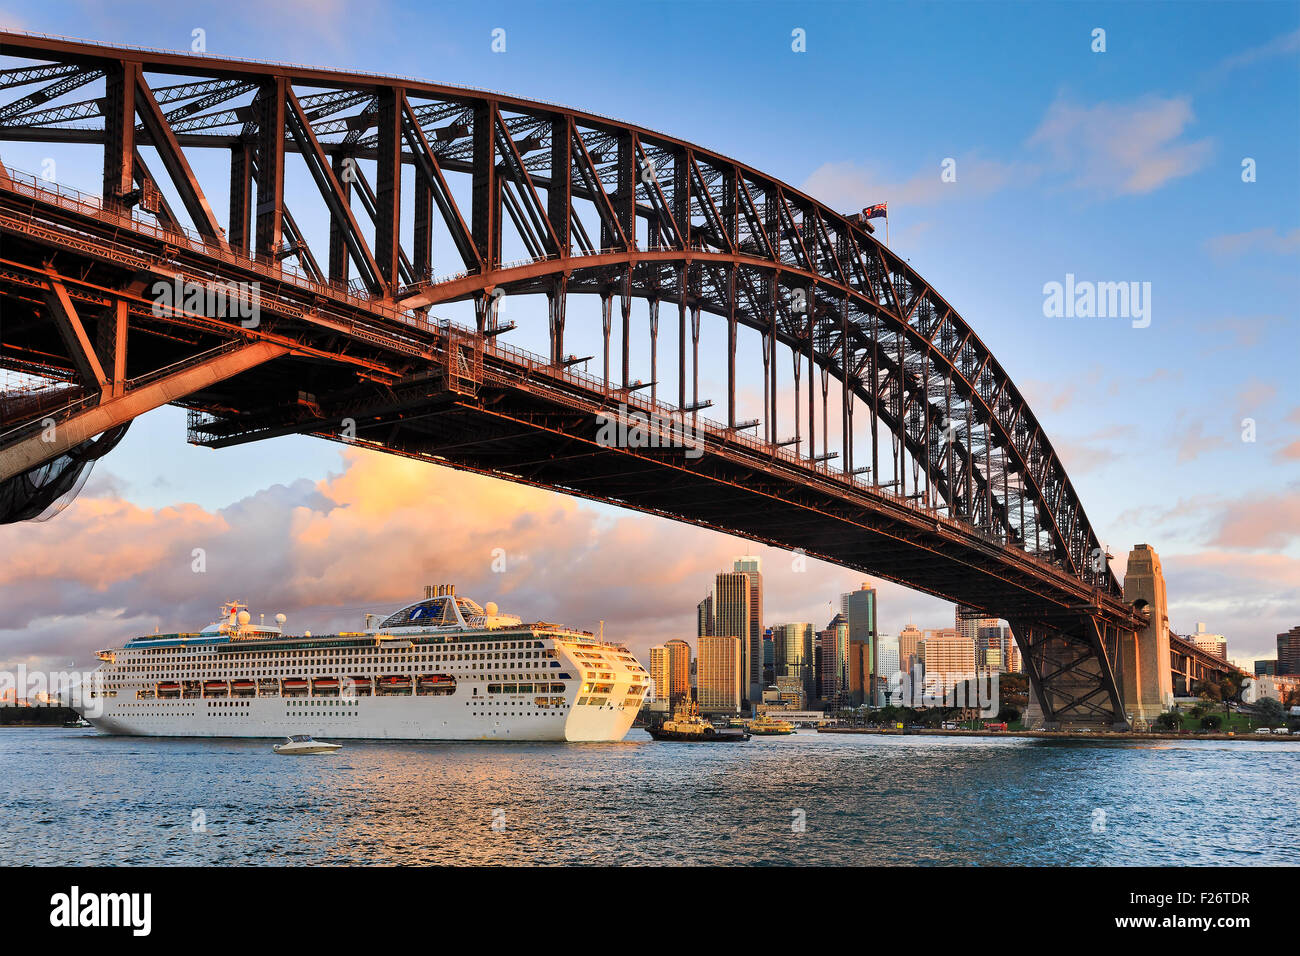 Oversized ocean cruise liner passing by under the Sydney Harbour Bridge at sunset backgrounded by city skyscrapers Stock Photo